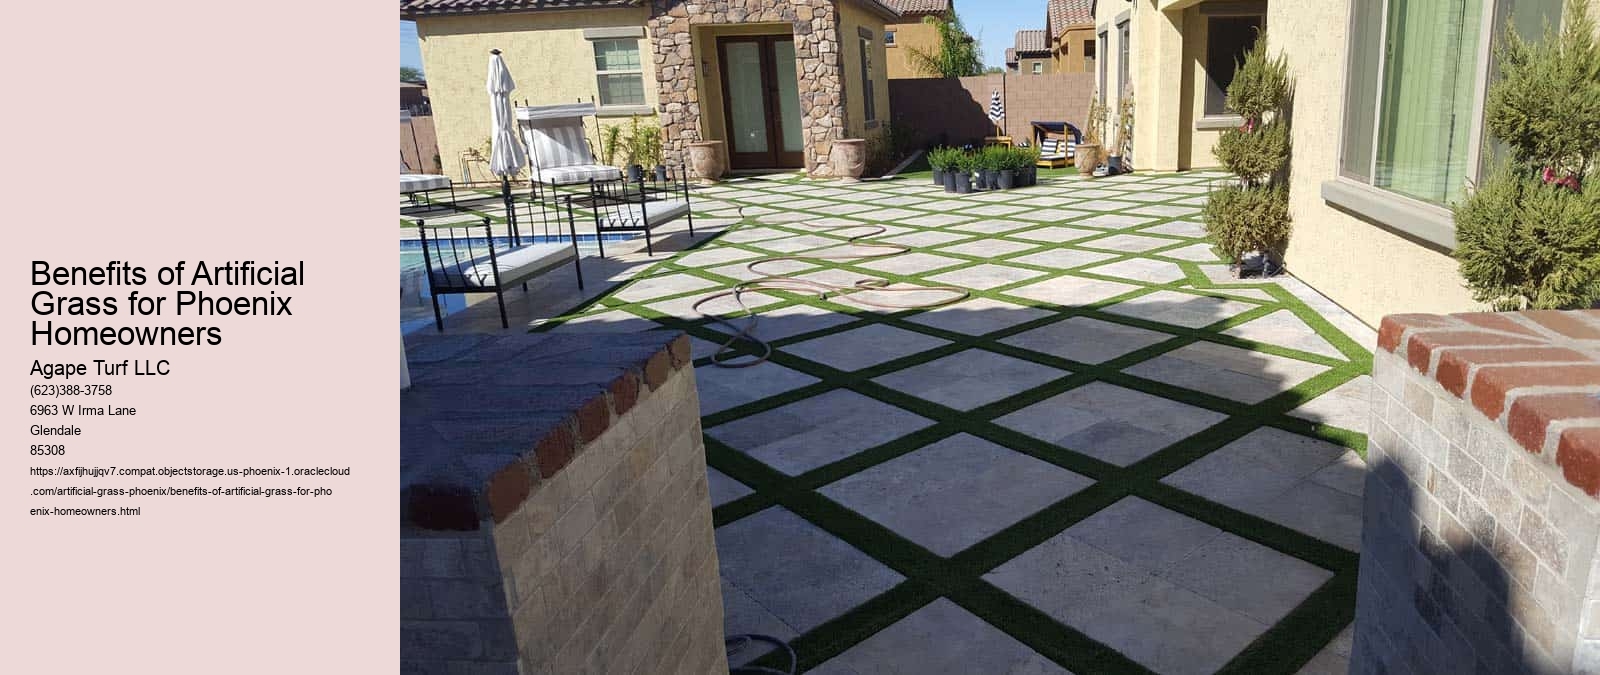 Benefits of Artificial Grass for Phoenix Homeowners